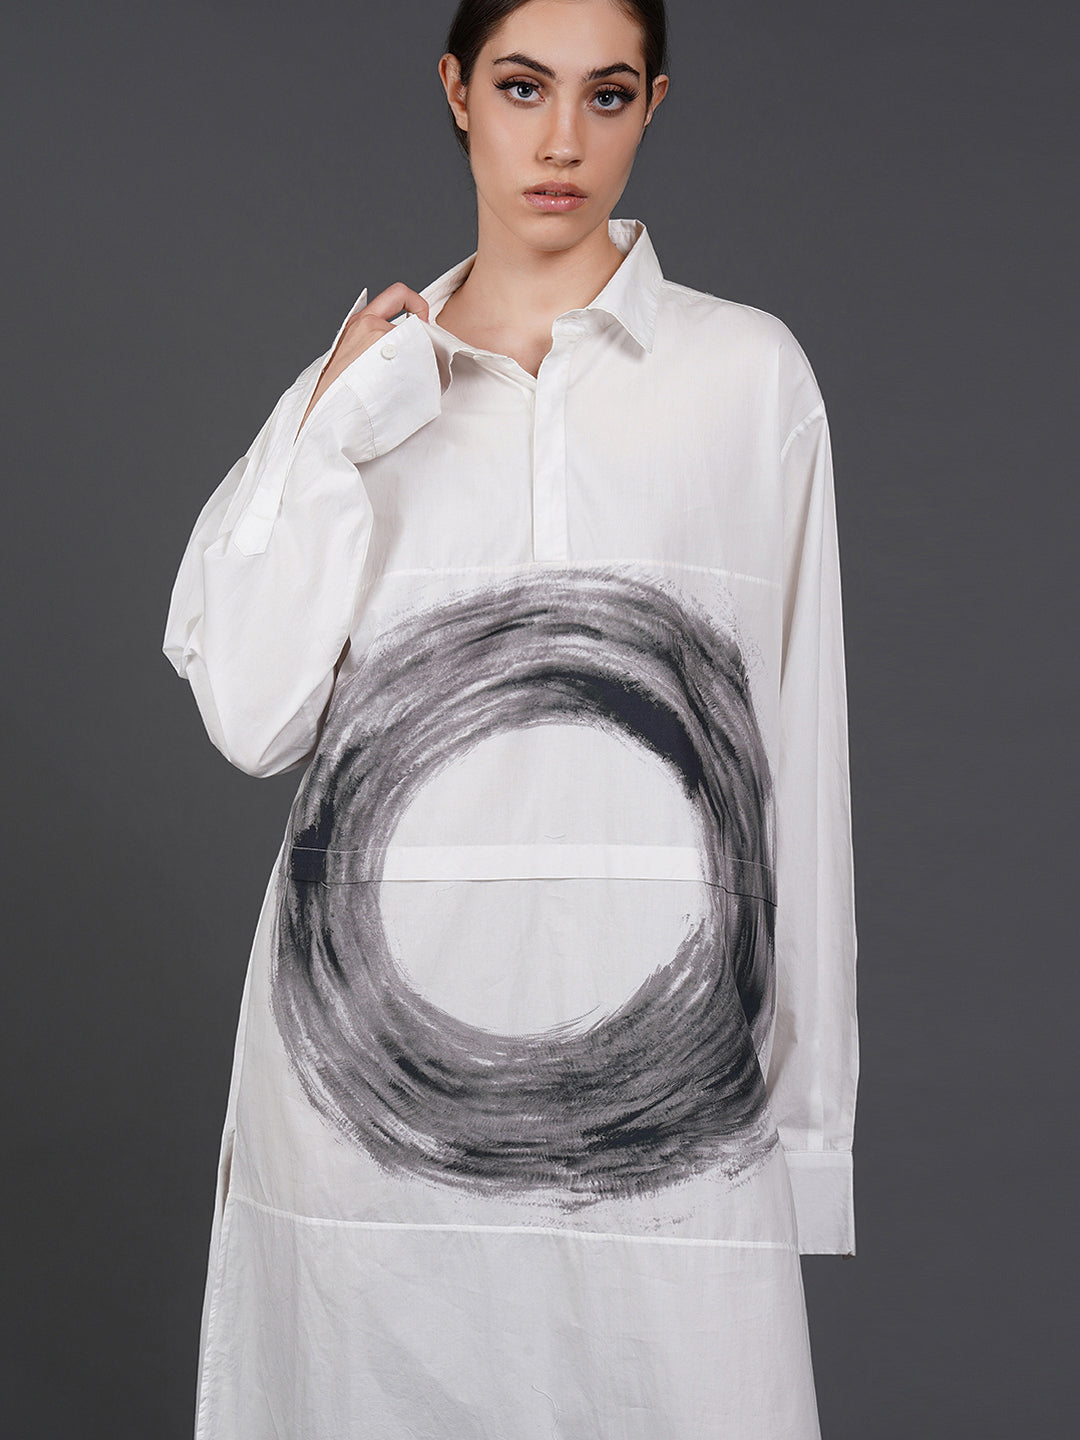 White, stylish, long,lose-fit, cotton shirt with digital print on it